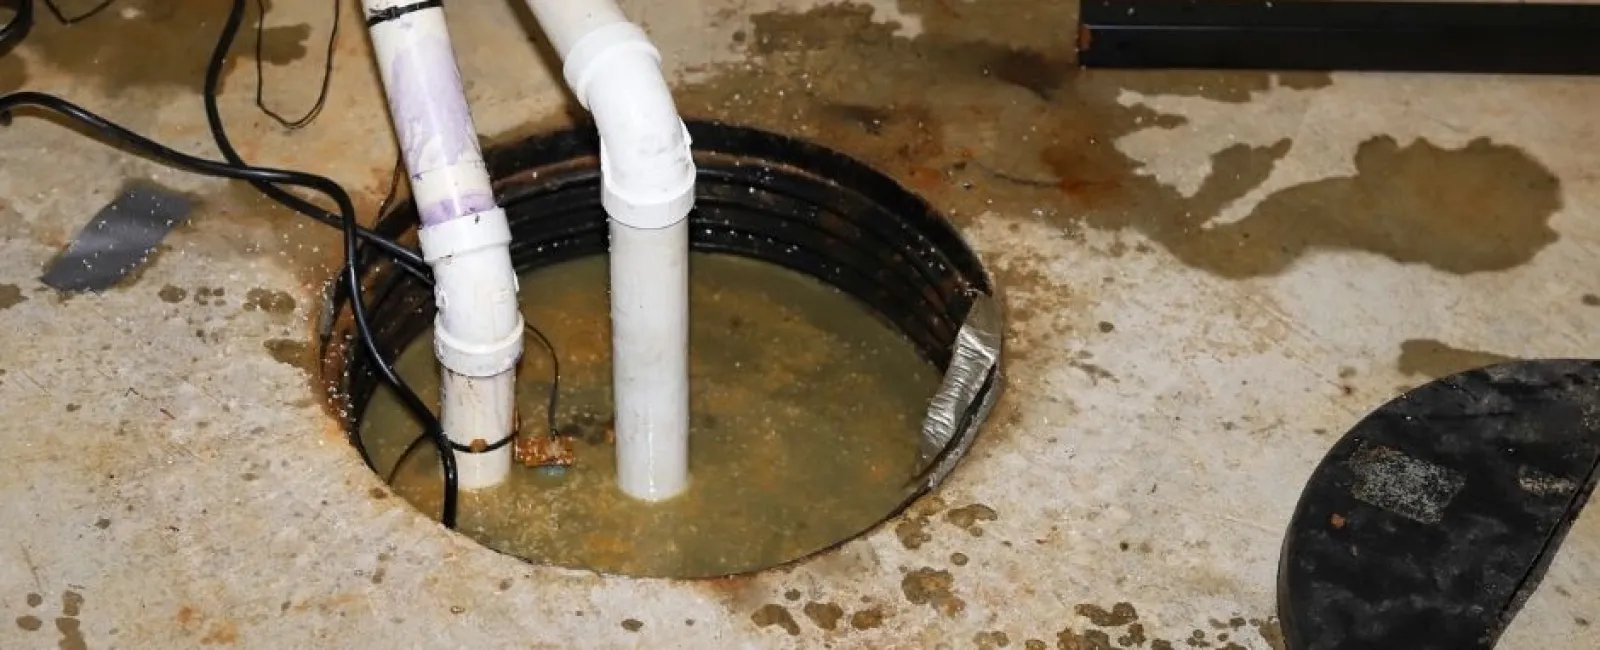 Problems That Could Cause Sump Pump to Fail